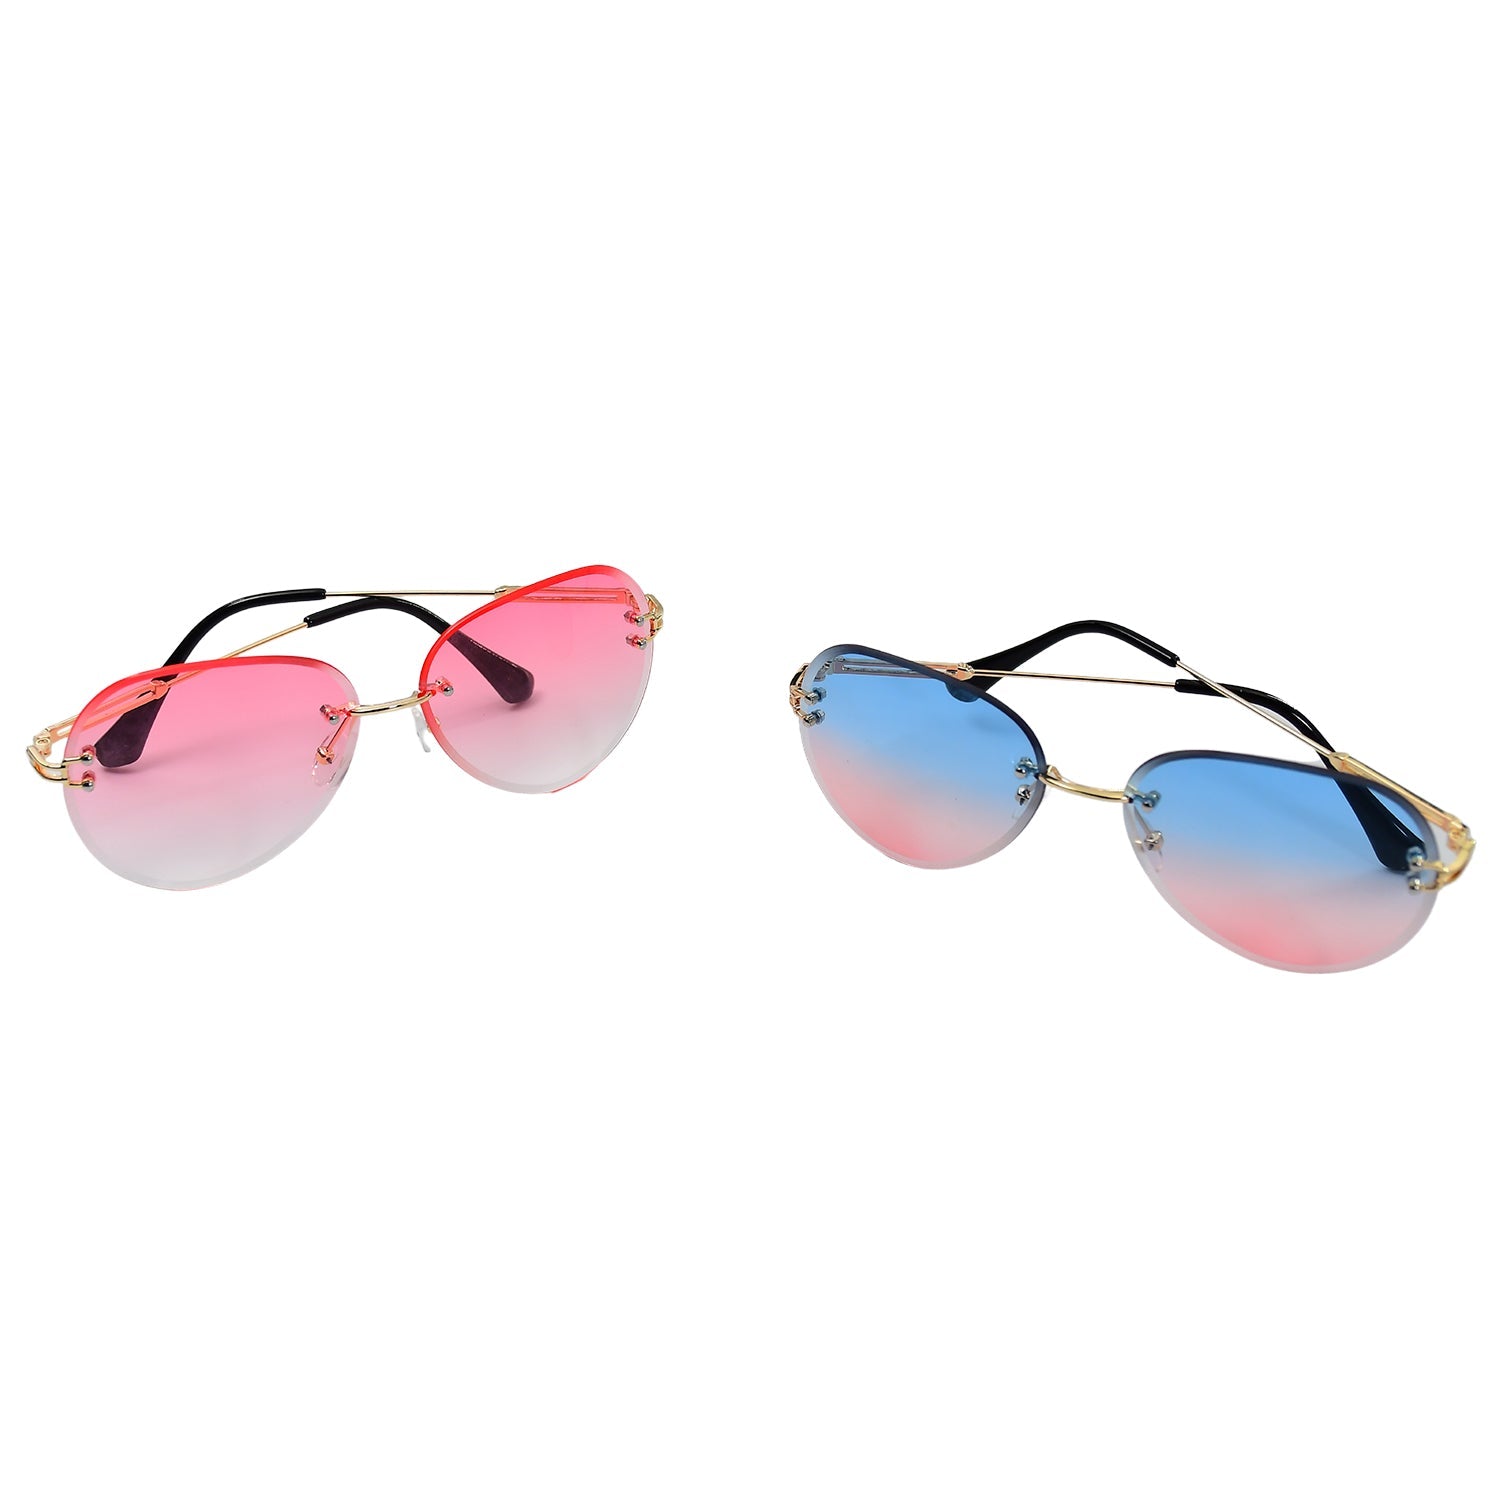 4951 1Pc Mix frame Sunglasses for men and women. Multi color and Different shape and design. DeoDap